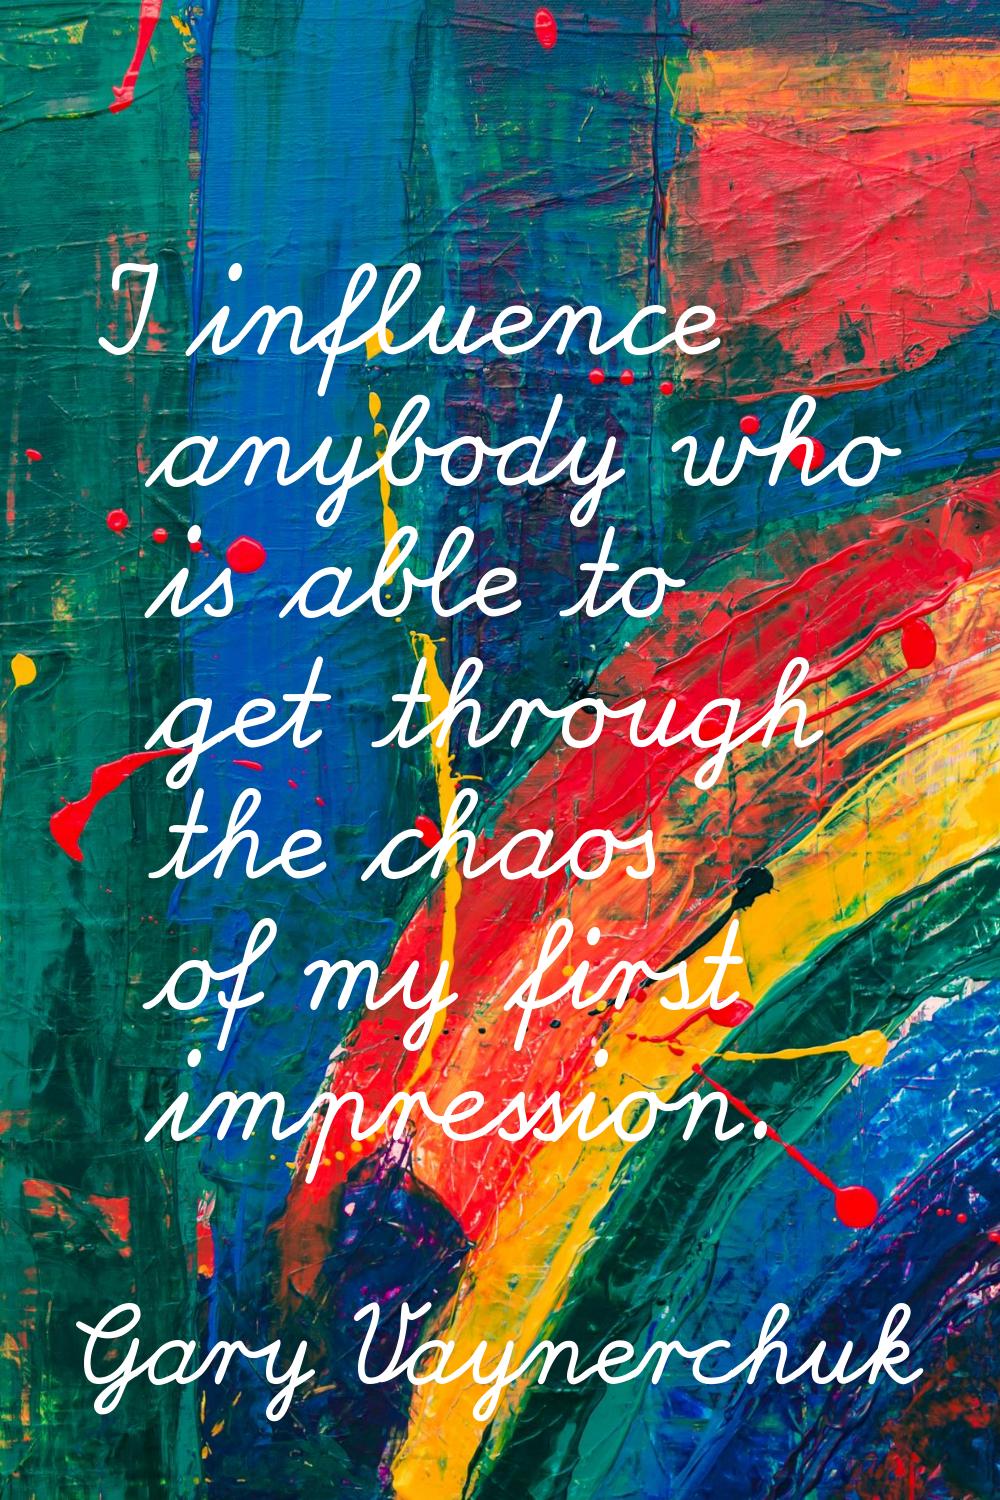 I influence anybody who is able to get through the chaos of my first impression.